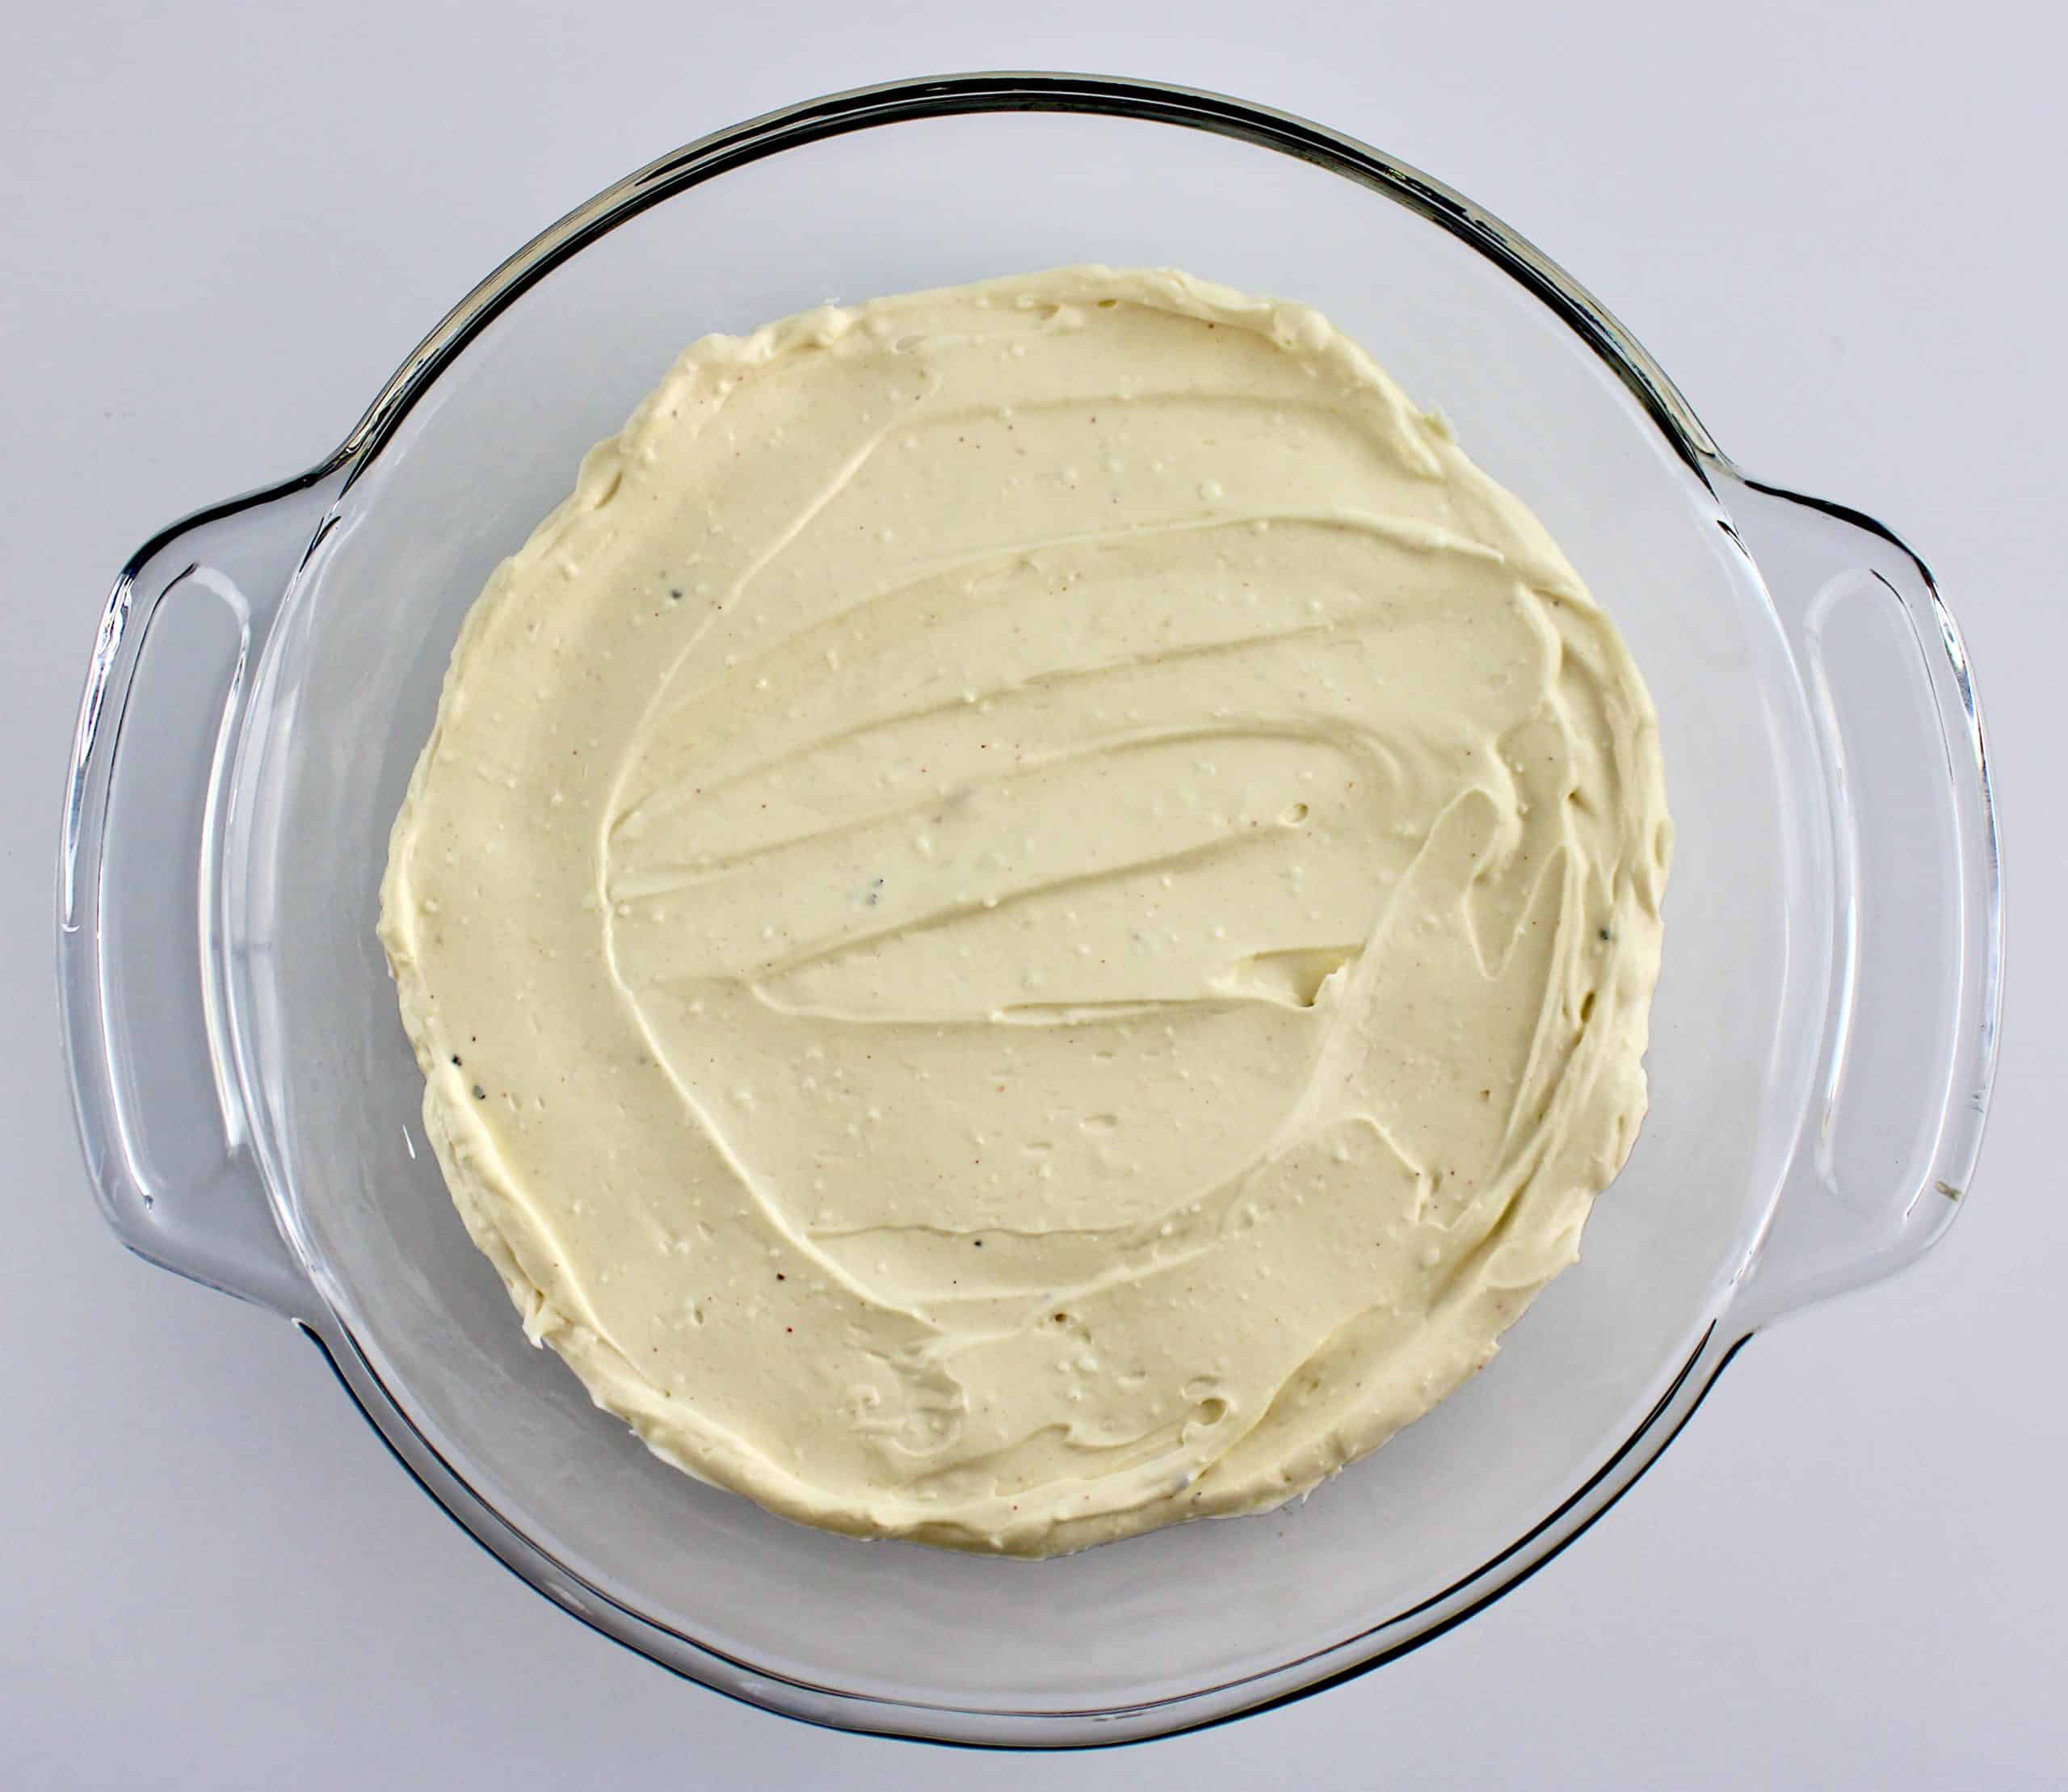 sour cream cream cheese and chipotle being mixed with hand mixer in glass bowl